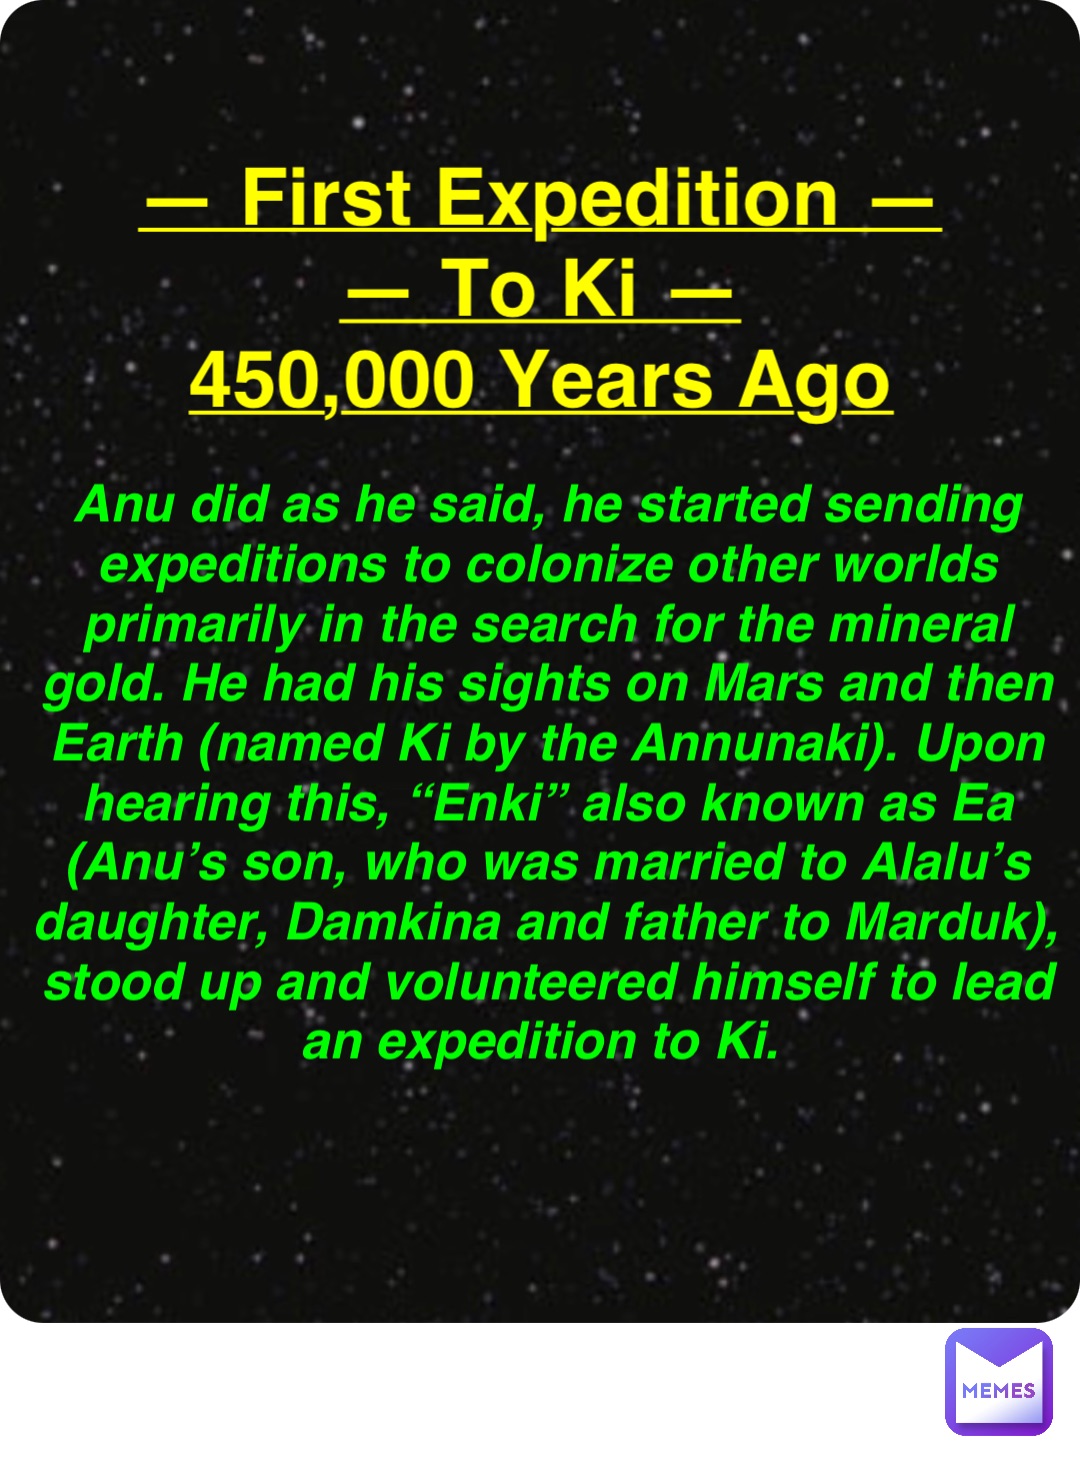 Double tap to edit — First Expedition —
— To Ki —
450,000 Years Ago Anu did as he said, he started sending expeditions to colonize other worlds primarily in the search for the mineral gold. He had his sights on Mars and then Earth (named Ki by the Annunaki). Upon hearing this, “Enki” also known as Ea (Anu’s son, who was married to Alalu’s daughter, Damkina and father to Marduk), stood up and volunteered himself to lead an expedition to Ki.